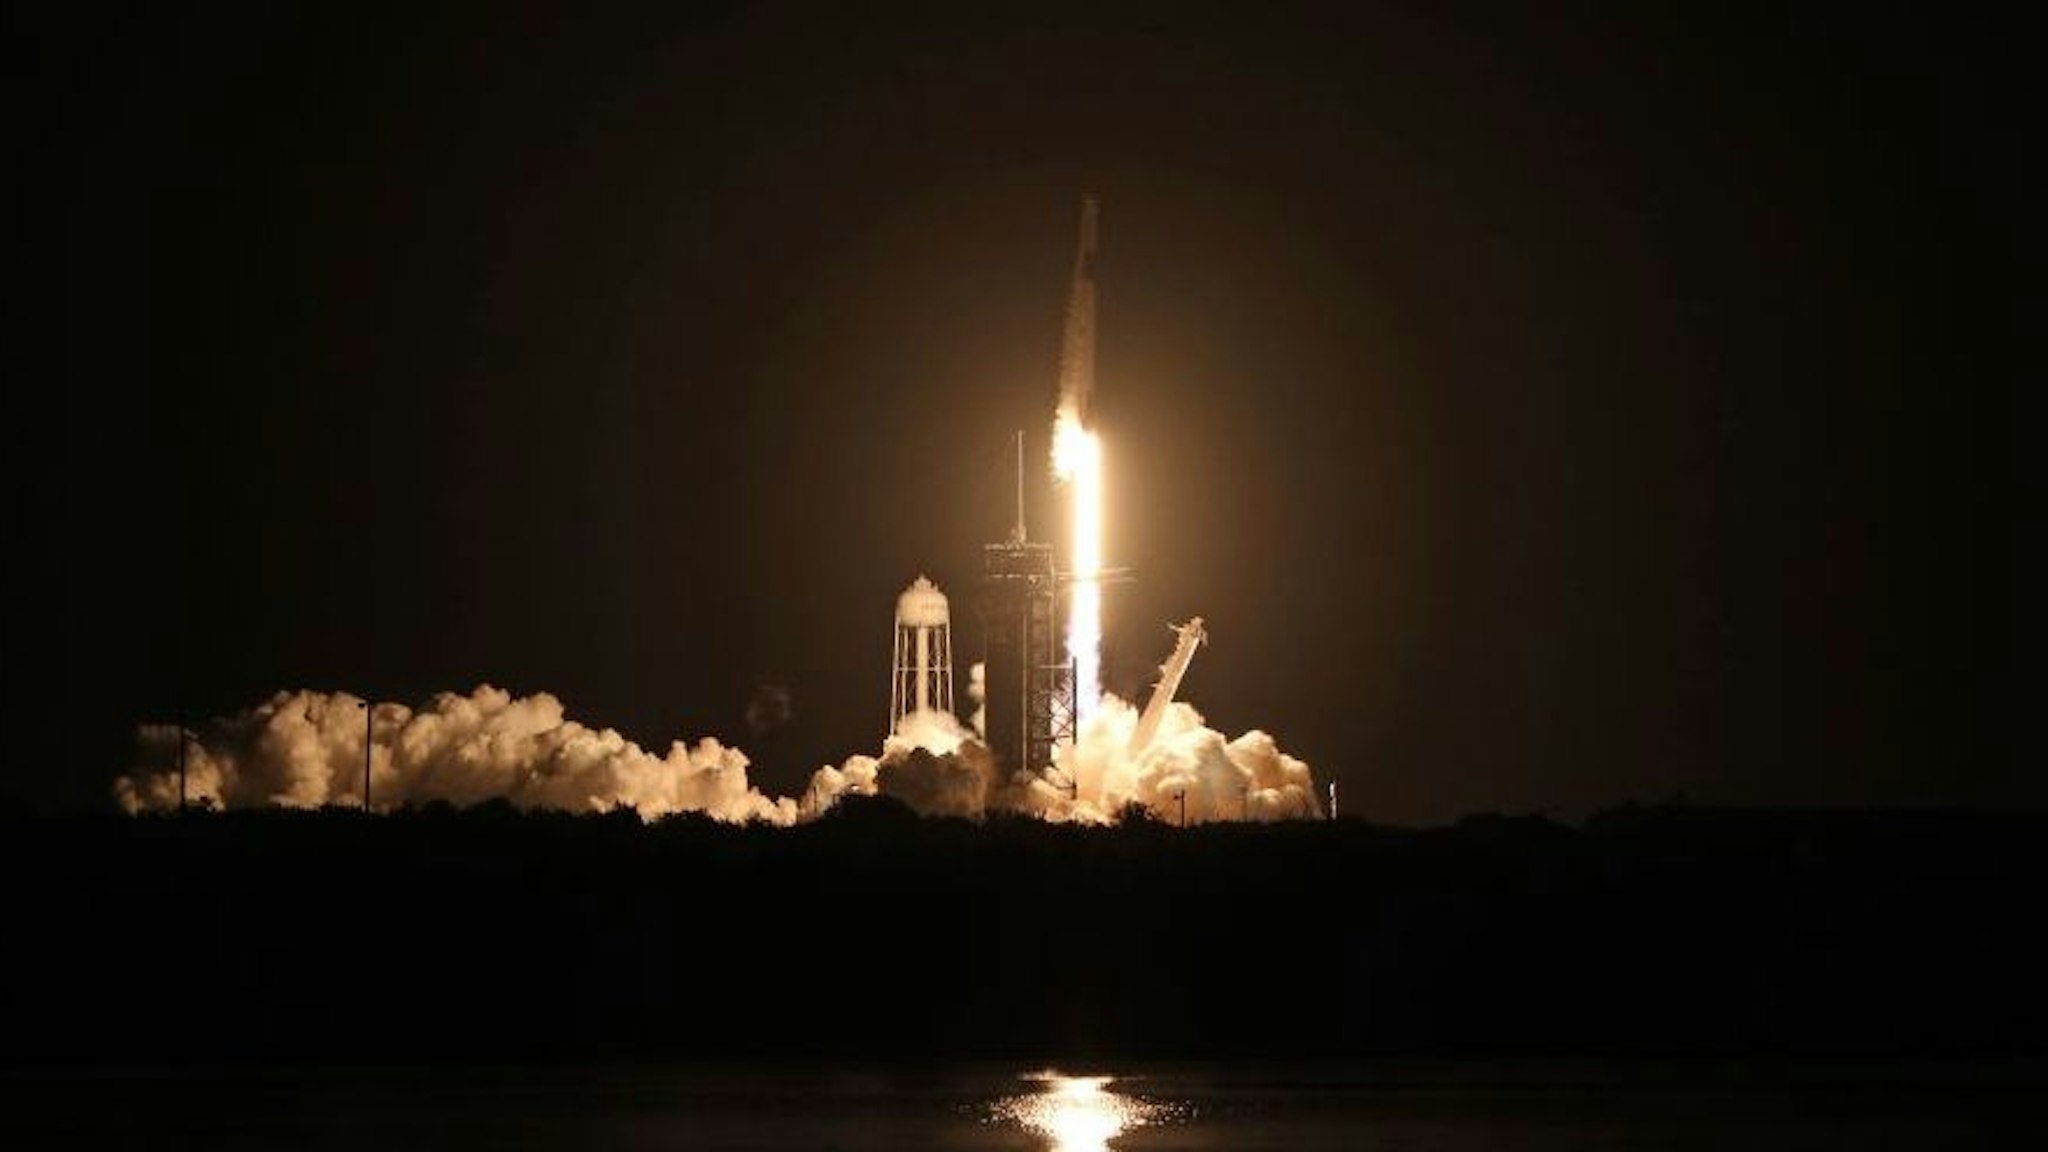 A SpaceX Falcon 9 rocket lifts off from launch complex 39A at the Kennedy Space Center in Florida on November 15, 2020. - NASA's SpaceX Crew-1 mission is the first crew rotation mission of the SpaceX Crew Dragon spacecraft and Falcon 9 rocket to the International Space Station as part of the agencys Commercial Crew Program. NASA astronauts Mike Hopkins, Victor Glover, and Shannon Walker, and astronaut Soichi Noguchi of the Japan Aerospace Exploration Agency (JAXA) are scheduled to launch at 7:27 p.m. EST on November 15, from Launch Complex 39A at the Kennedy Space Center. (Photo by Gregg Newton / AFP)